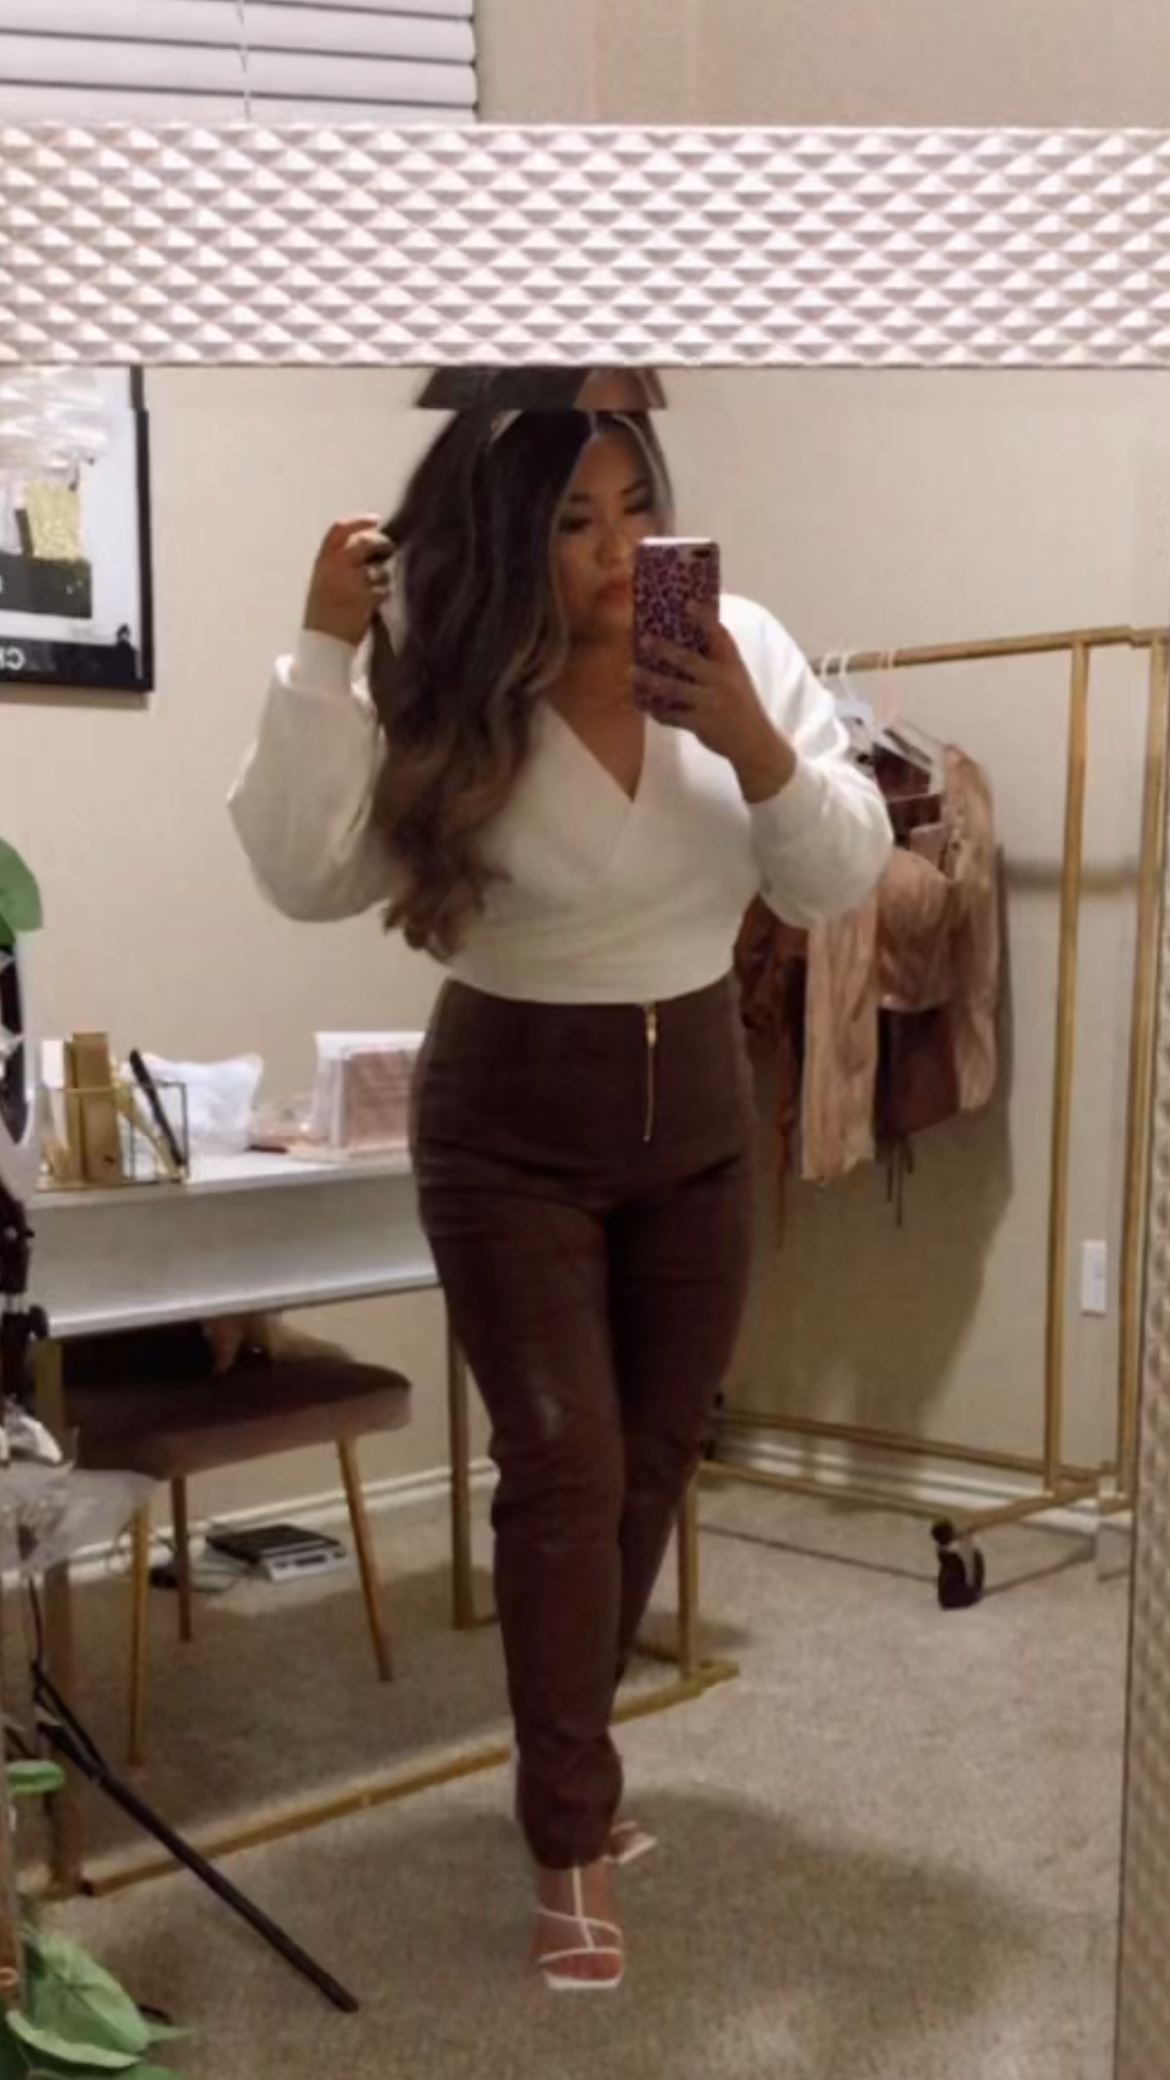 Brown Faux Leather Leggings